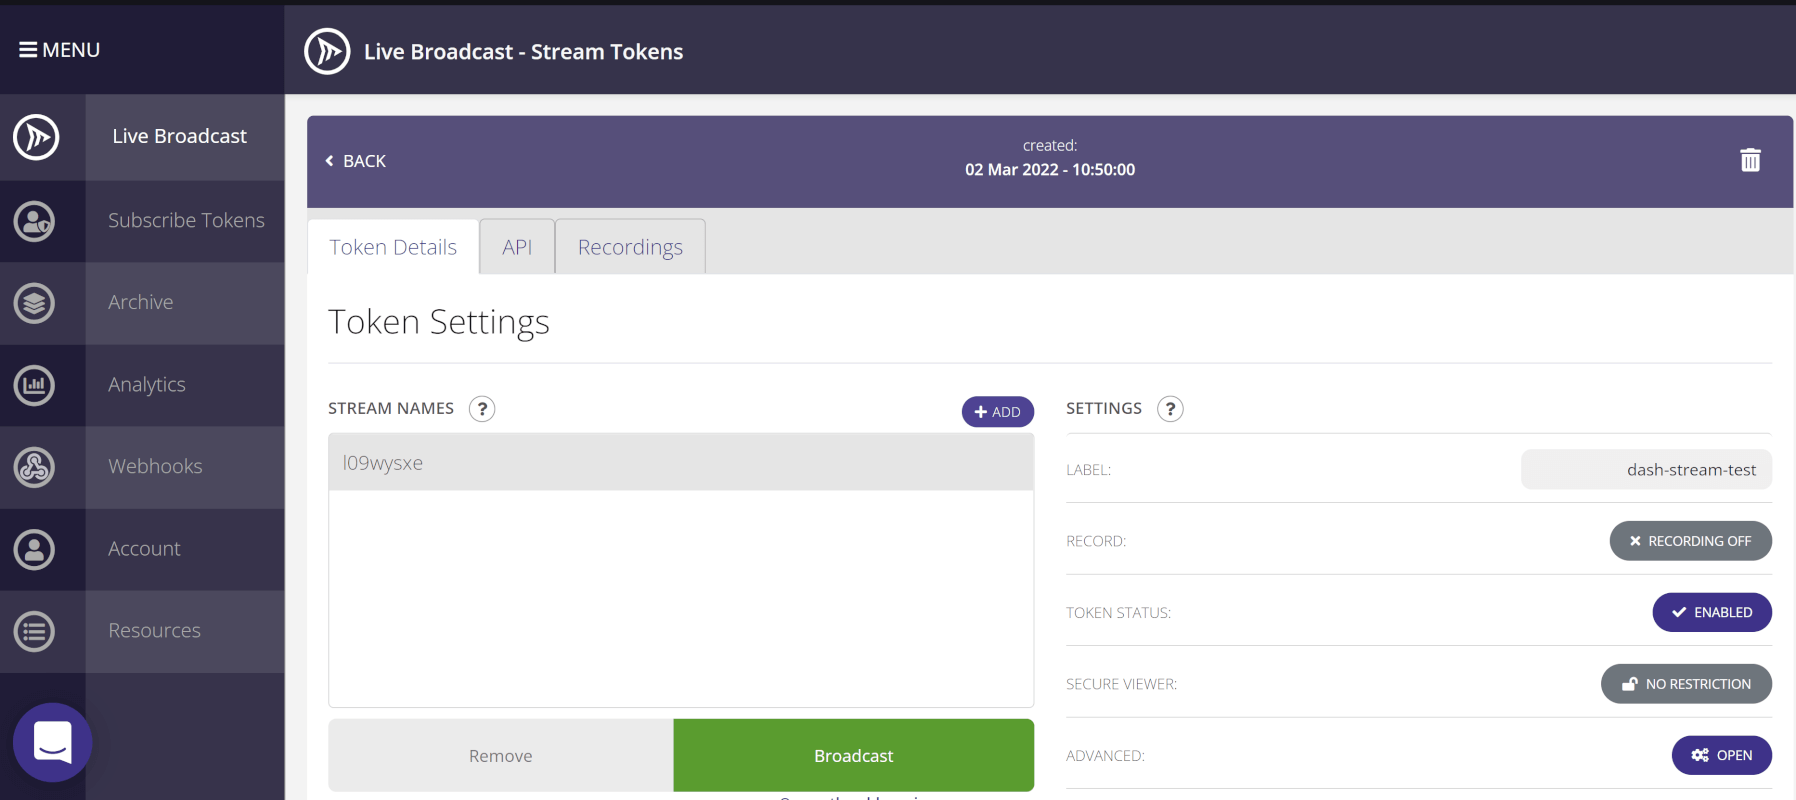 Clicking on the token name brings you into the token settings where you can create a stream. Build a quality ultra low latency livestream platform that can support hundreds of thousands of viewers with just a few lines of JavaScript by leveraging the power of WebRTC and Dolby.io Millicast.